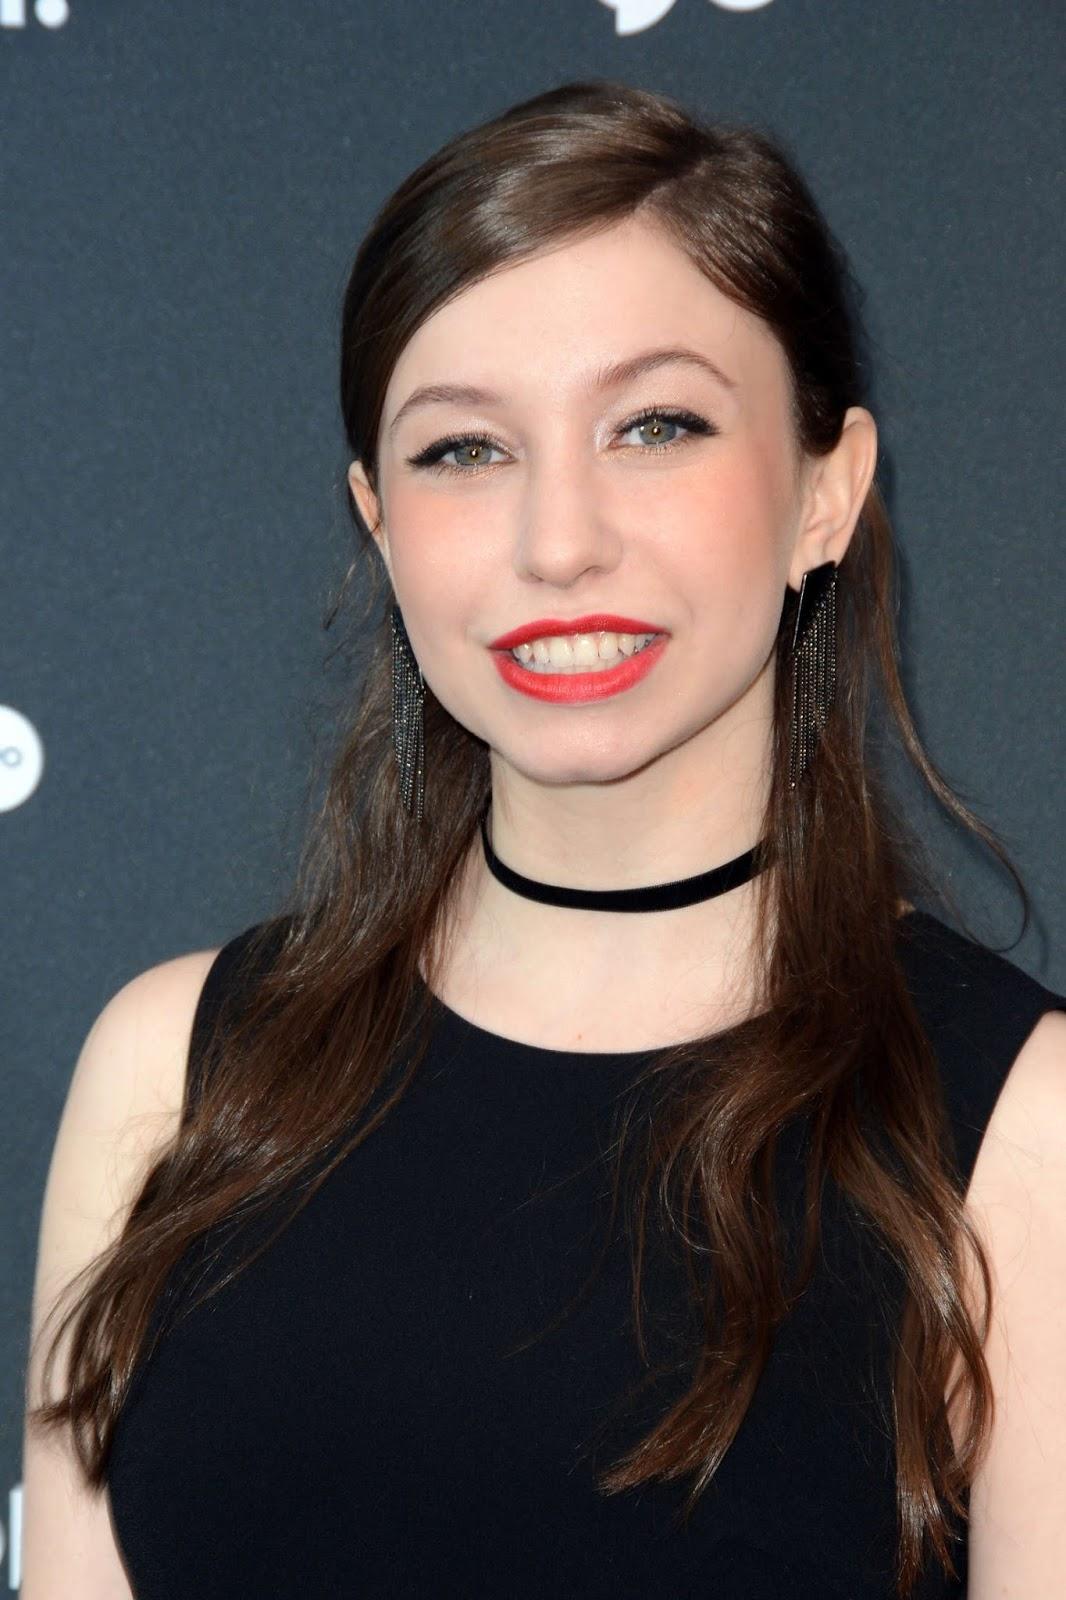 70+ Hot Pictures Of Katelyn Nacon Which Are Sure to Catch Your Attention 167